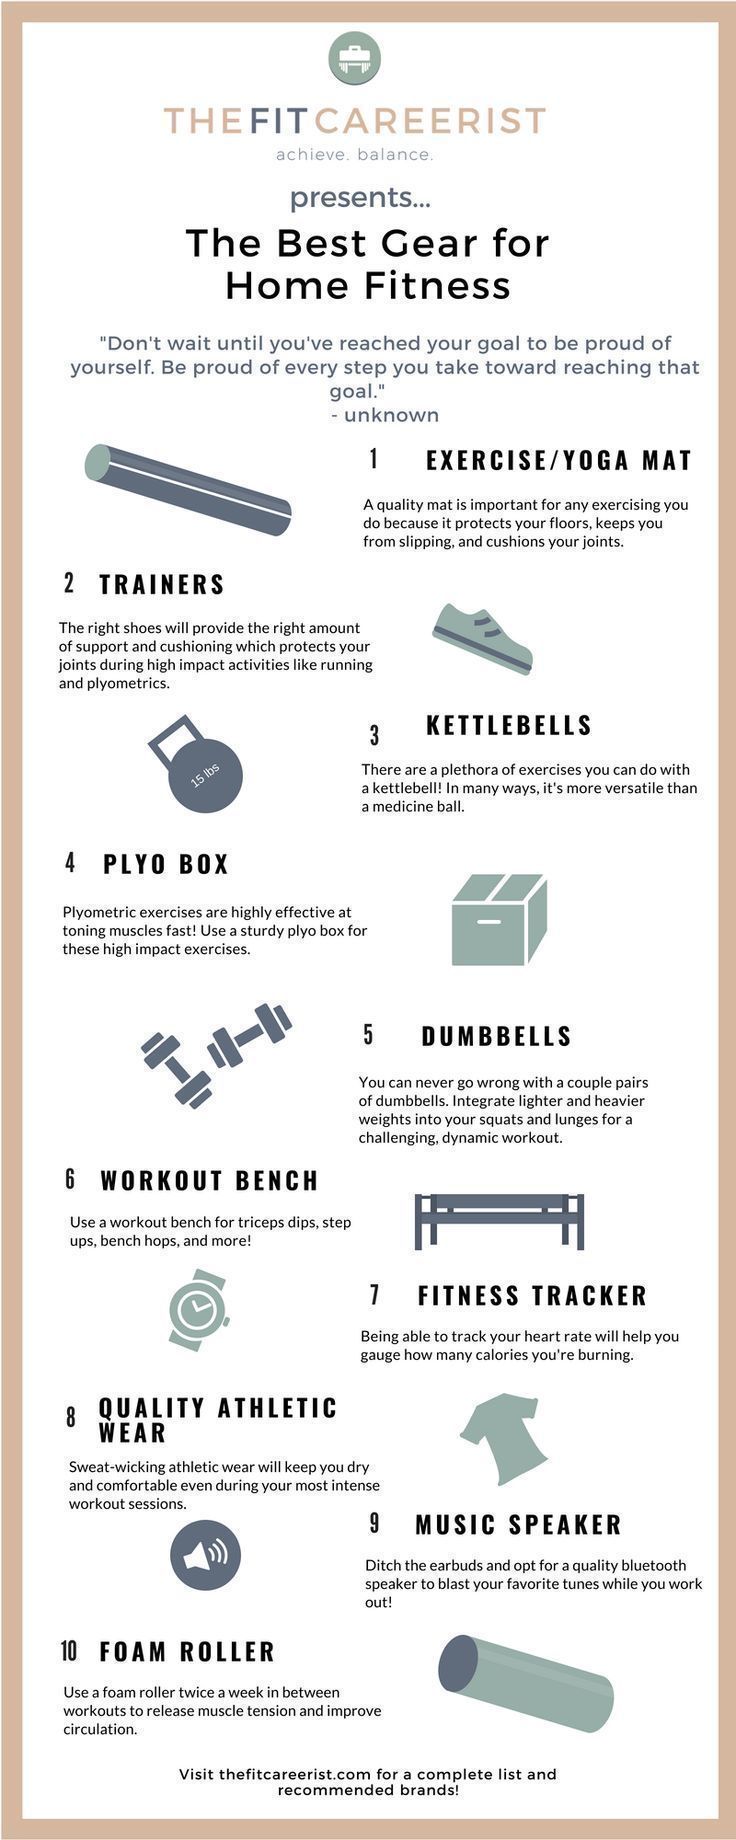 The Ultimate List of At-Home Gym Essentials 2020 - The Ultimate List of At-Home Gym Essentials 2020 -   20 fitness Room plan ideas